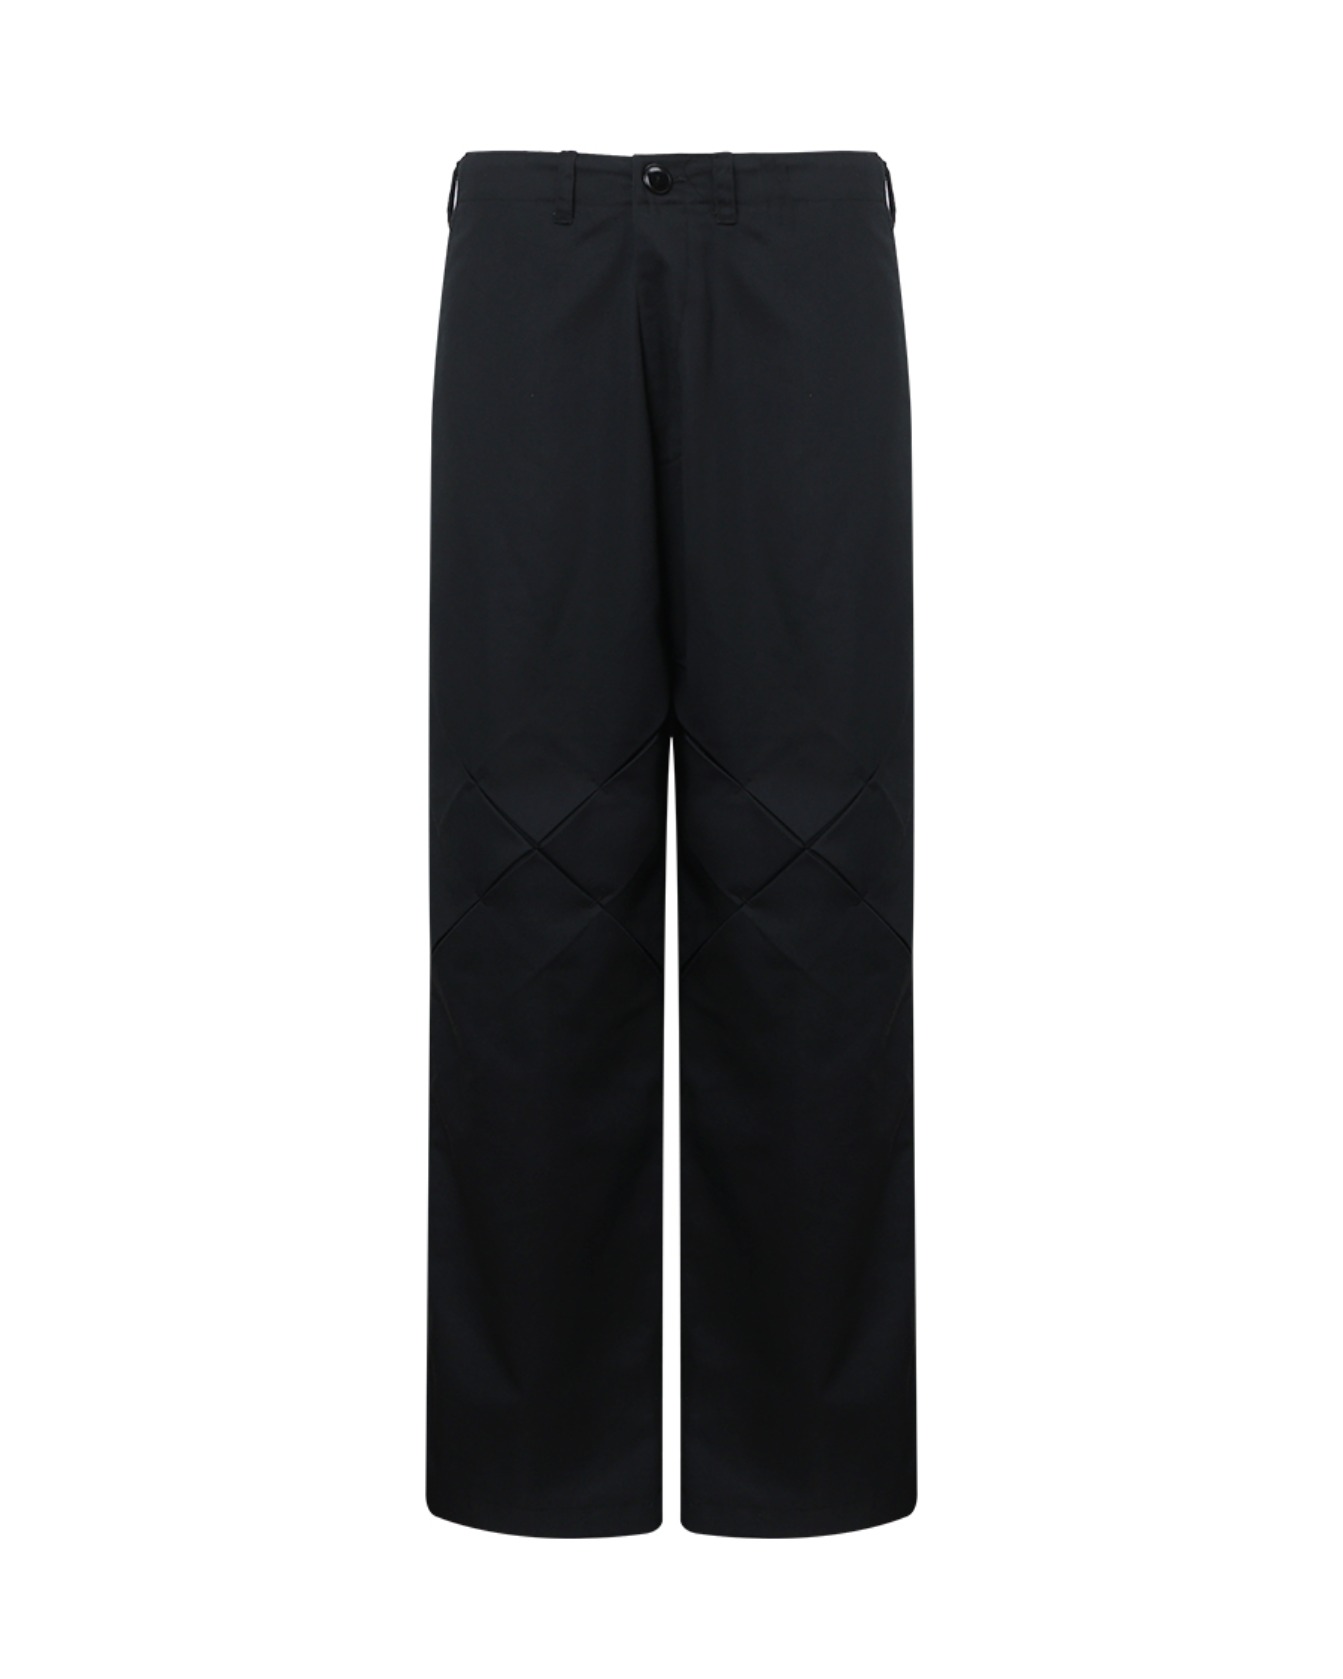 X FRENCH WORK TROUSER (DEVELOPED)